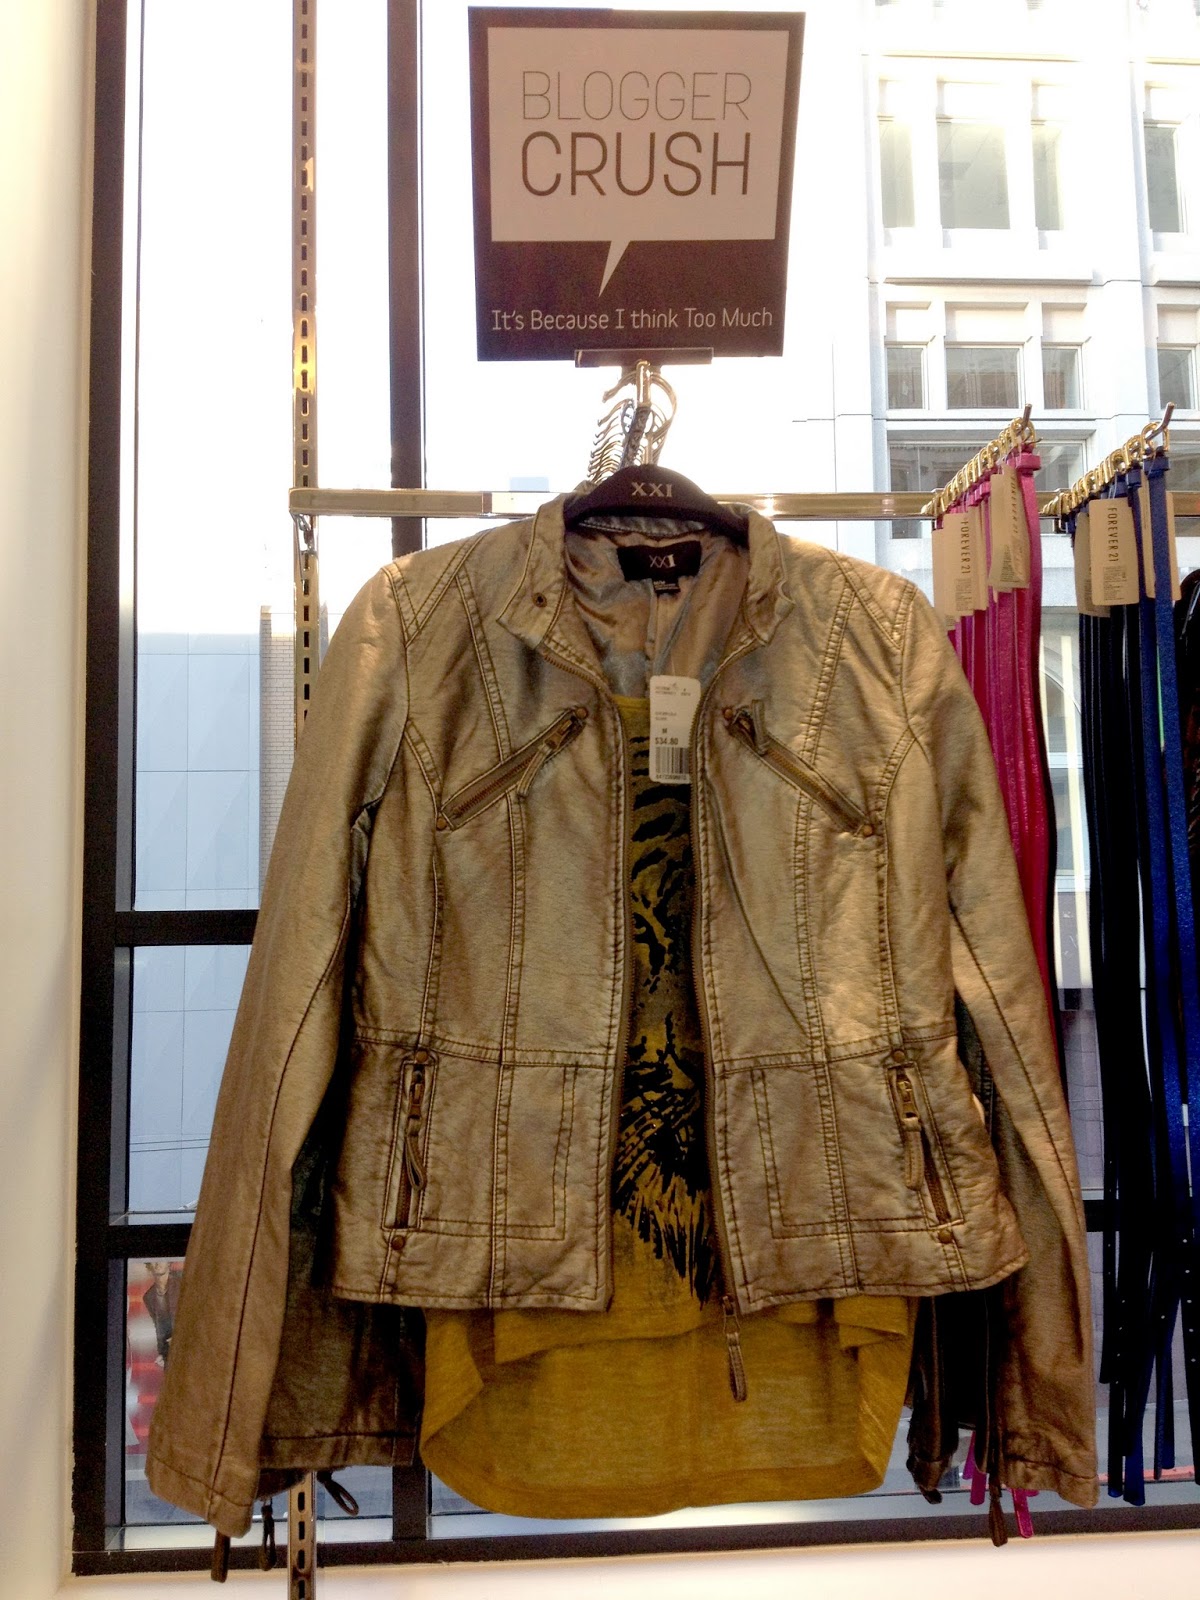 It's because I think too much: San Francisco's New Forever 21 Grand Opening